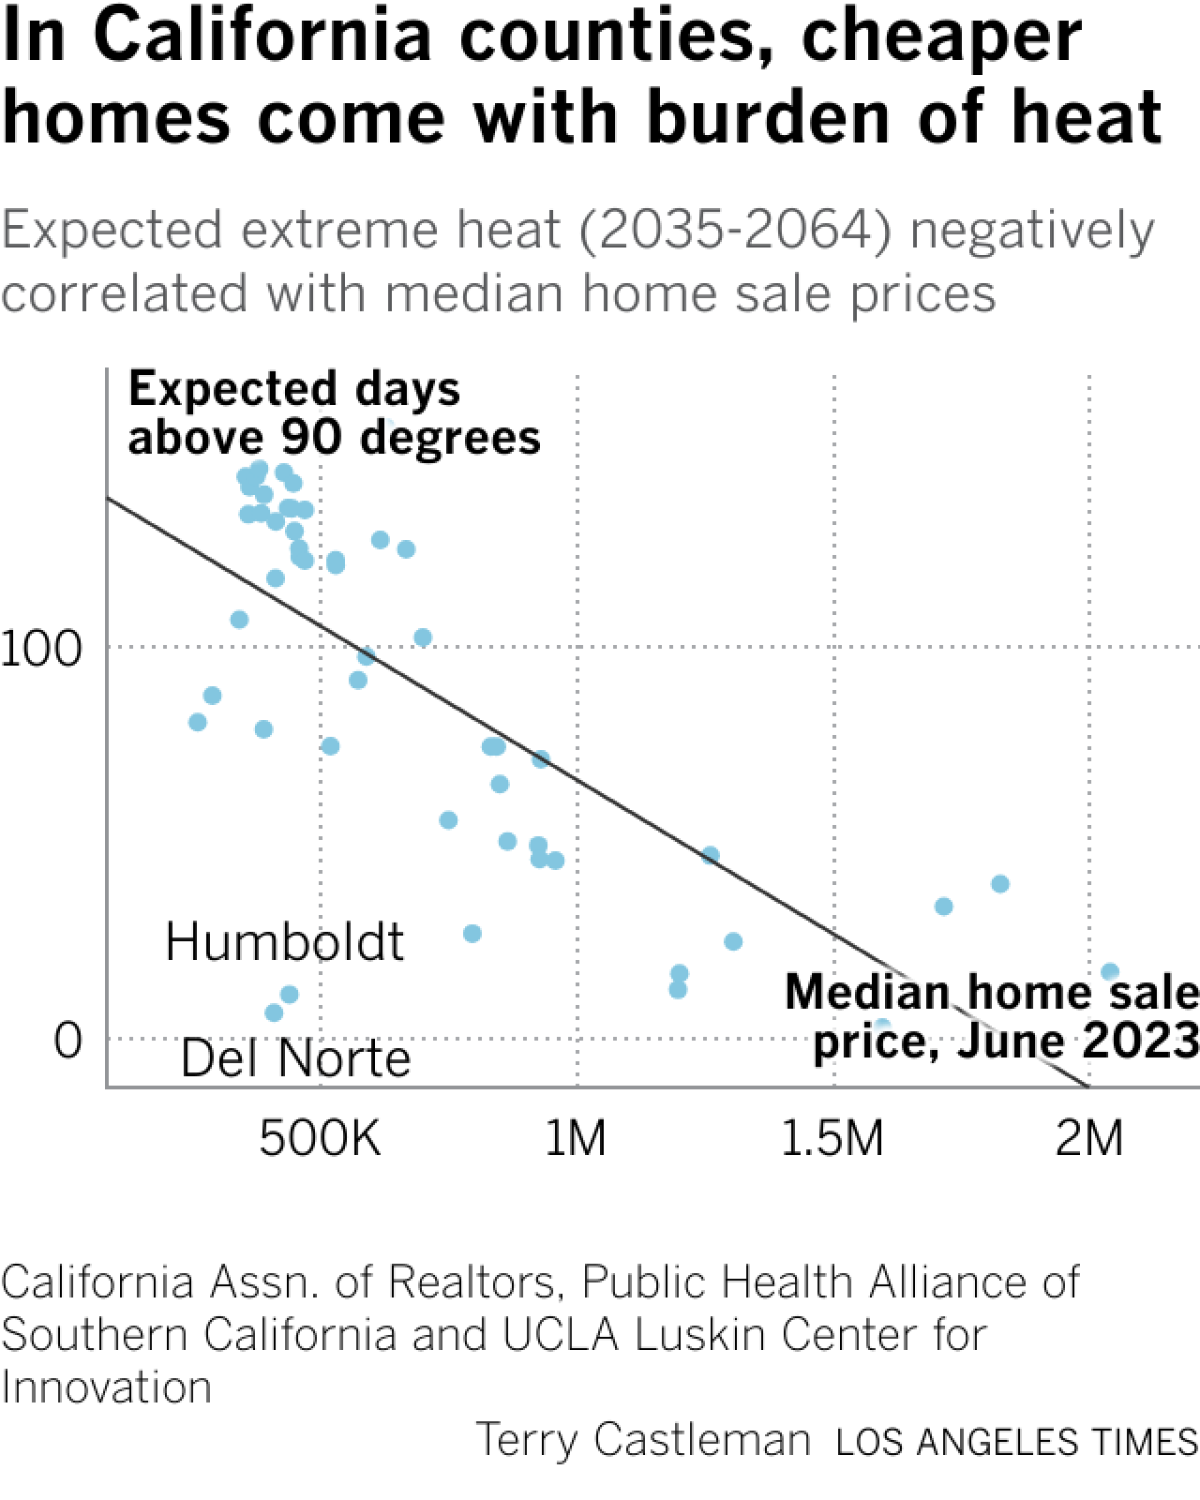 Chart showing that as median home sale price goes up for California counties, expected number of days above 90 degrees in mid-21st century decreases.